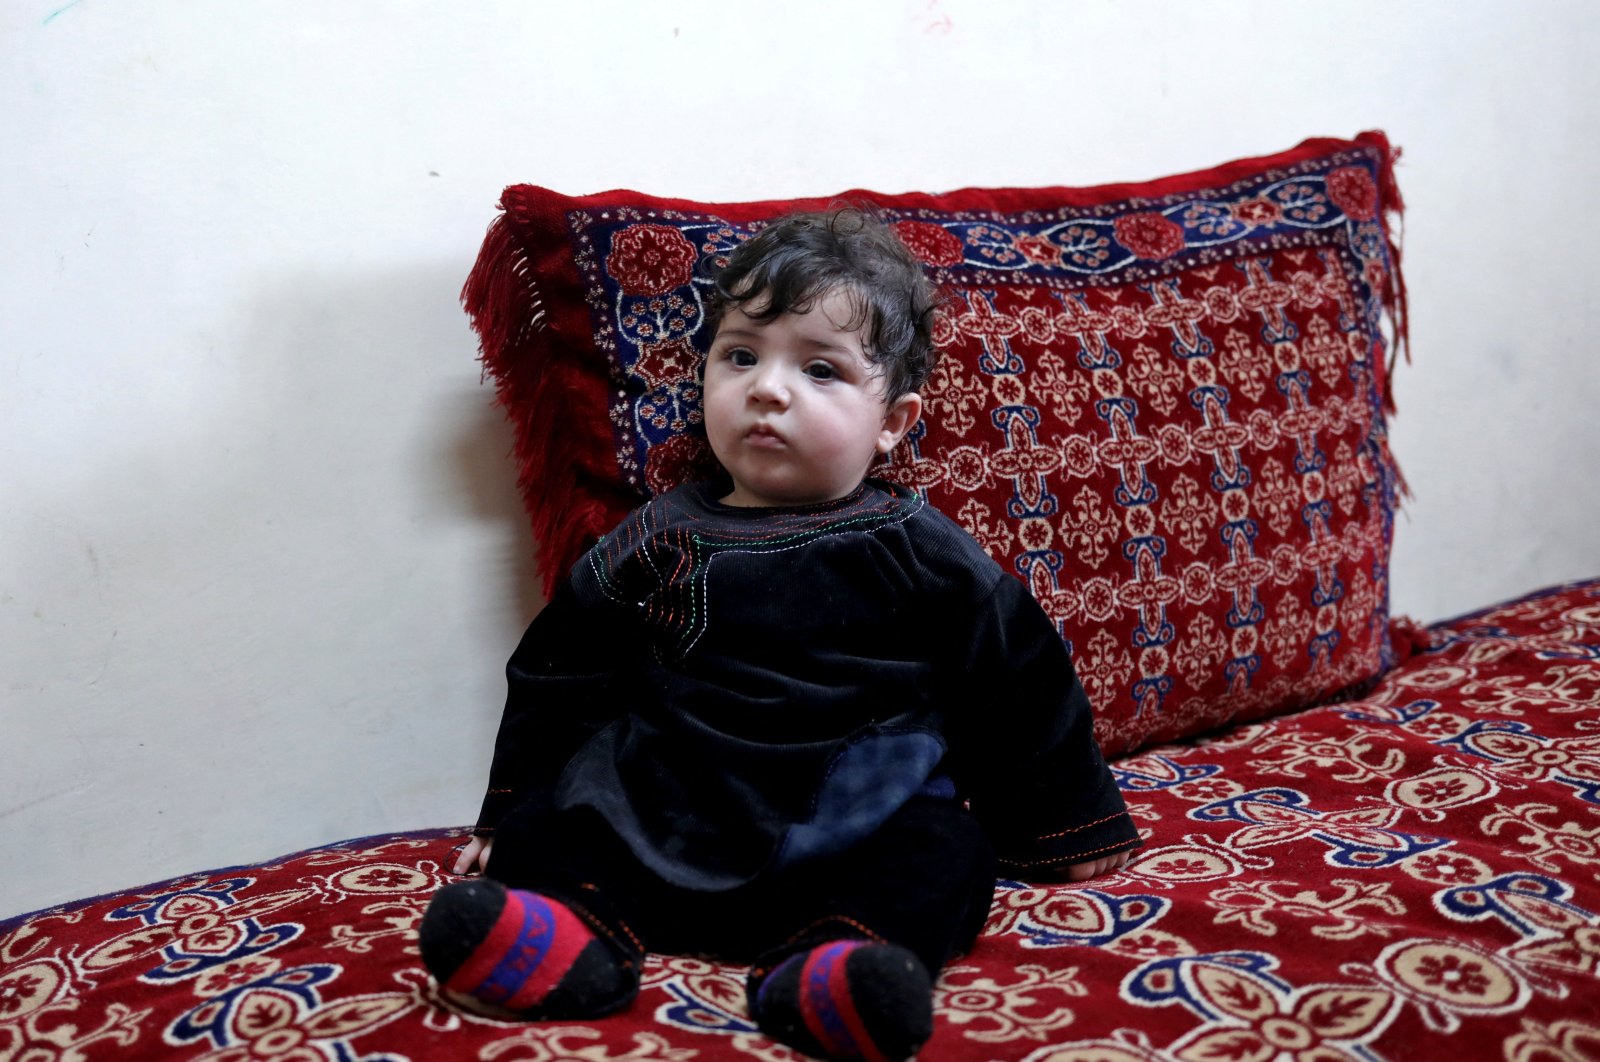 Baby Sohail Ahmadi sits inside the house of Hamid Safi, a taxi driver who had found Sohail in the airport, in Kabul, Afghanistan, Jan. 7, 2022. (Reuters Photo)